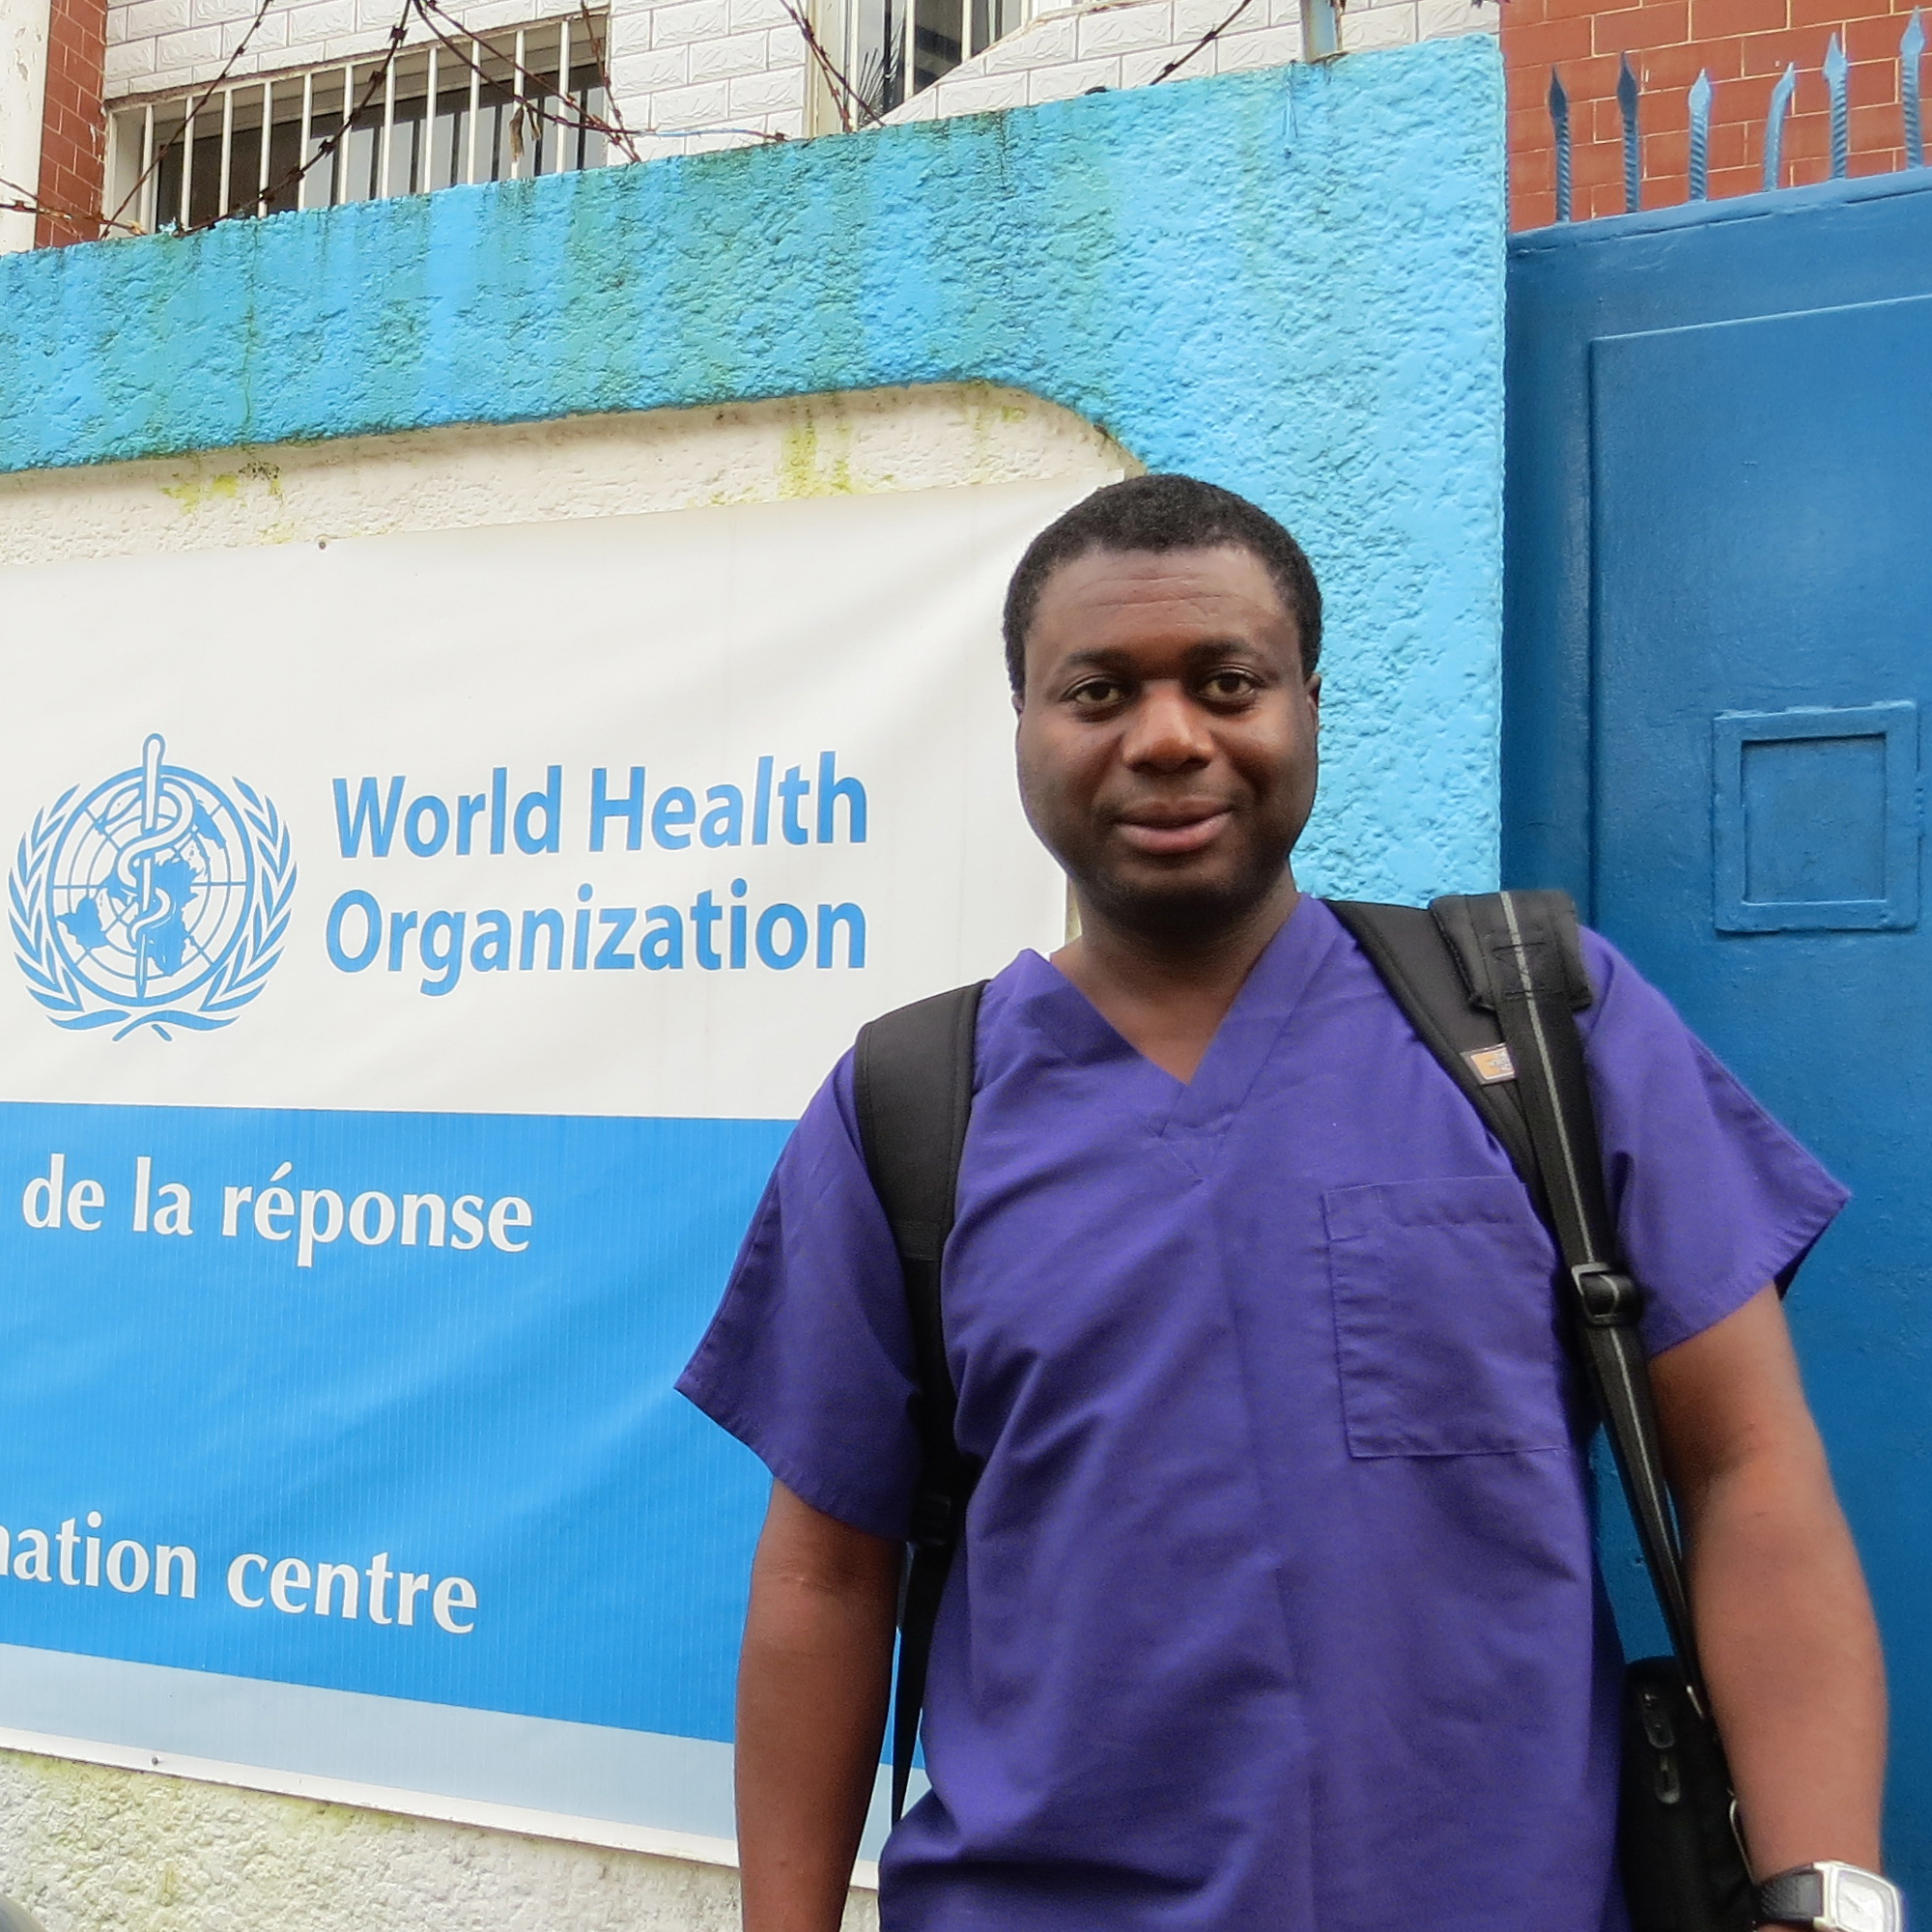 Man wearing medical scrubs stands in front of a World Health Organization poster